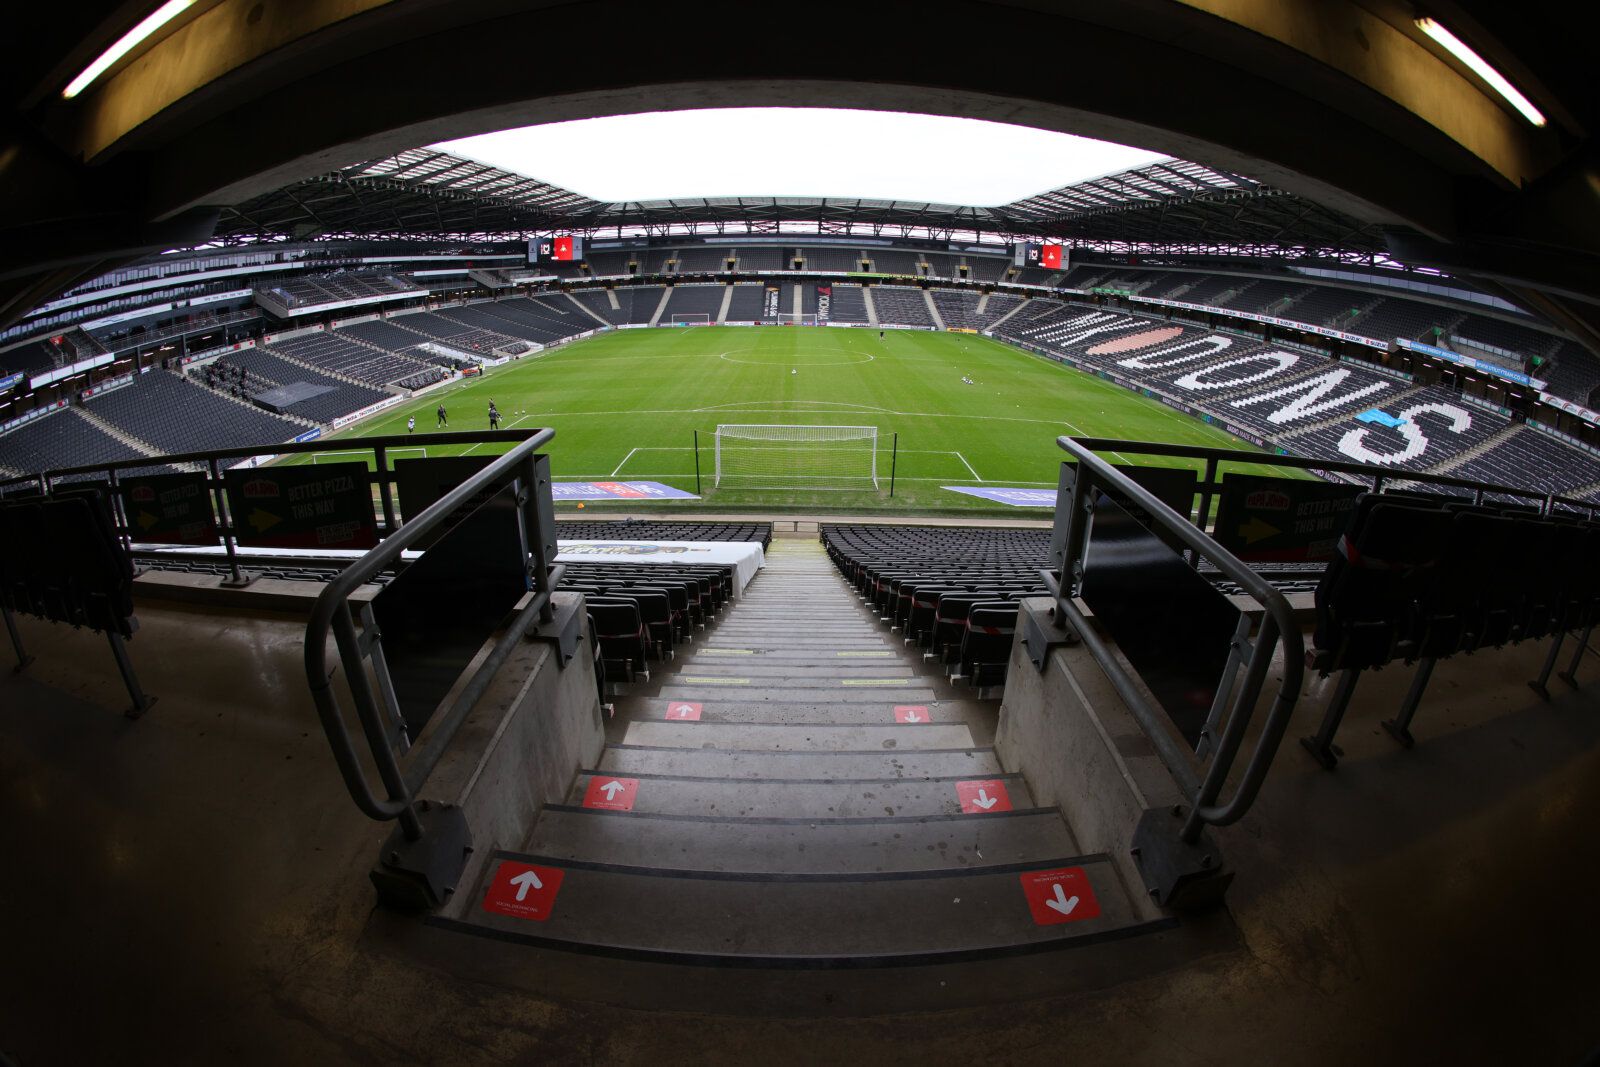 MILTON KEYNES, ENGLAND - MARCH 27: A general view inside the stadium before the Sky Bet League One match between Milton Keynes Dons and Doncaster Rovers at Stadium mk on March 27, 2021 in Milton Keynes, England. Sporting stadiums around the UK remain under strict restrictions due to the Coronavirus Pandemic as Government social distancing laws prohibit fans inside venues resulting in games being played behind closed doors. (Photo by Richard Heathcote/Getty Images)